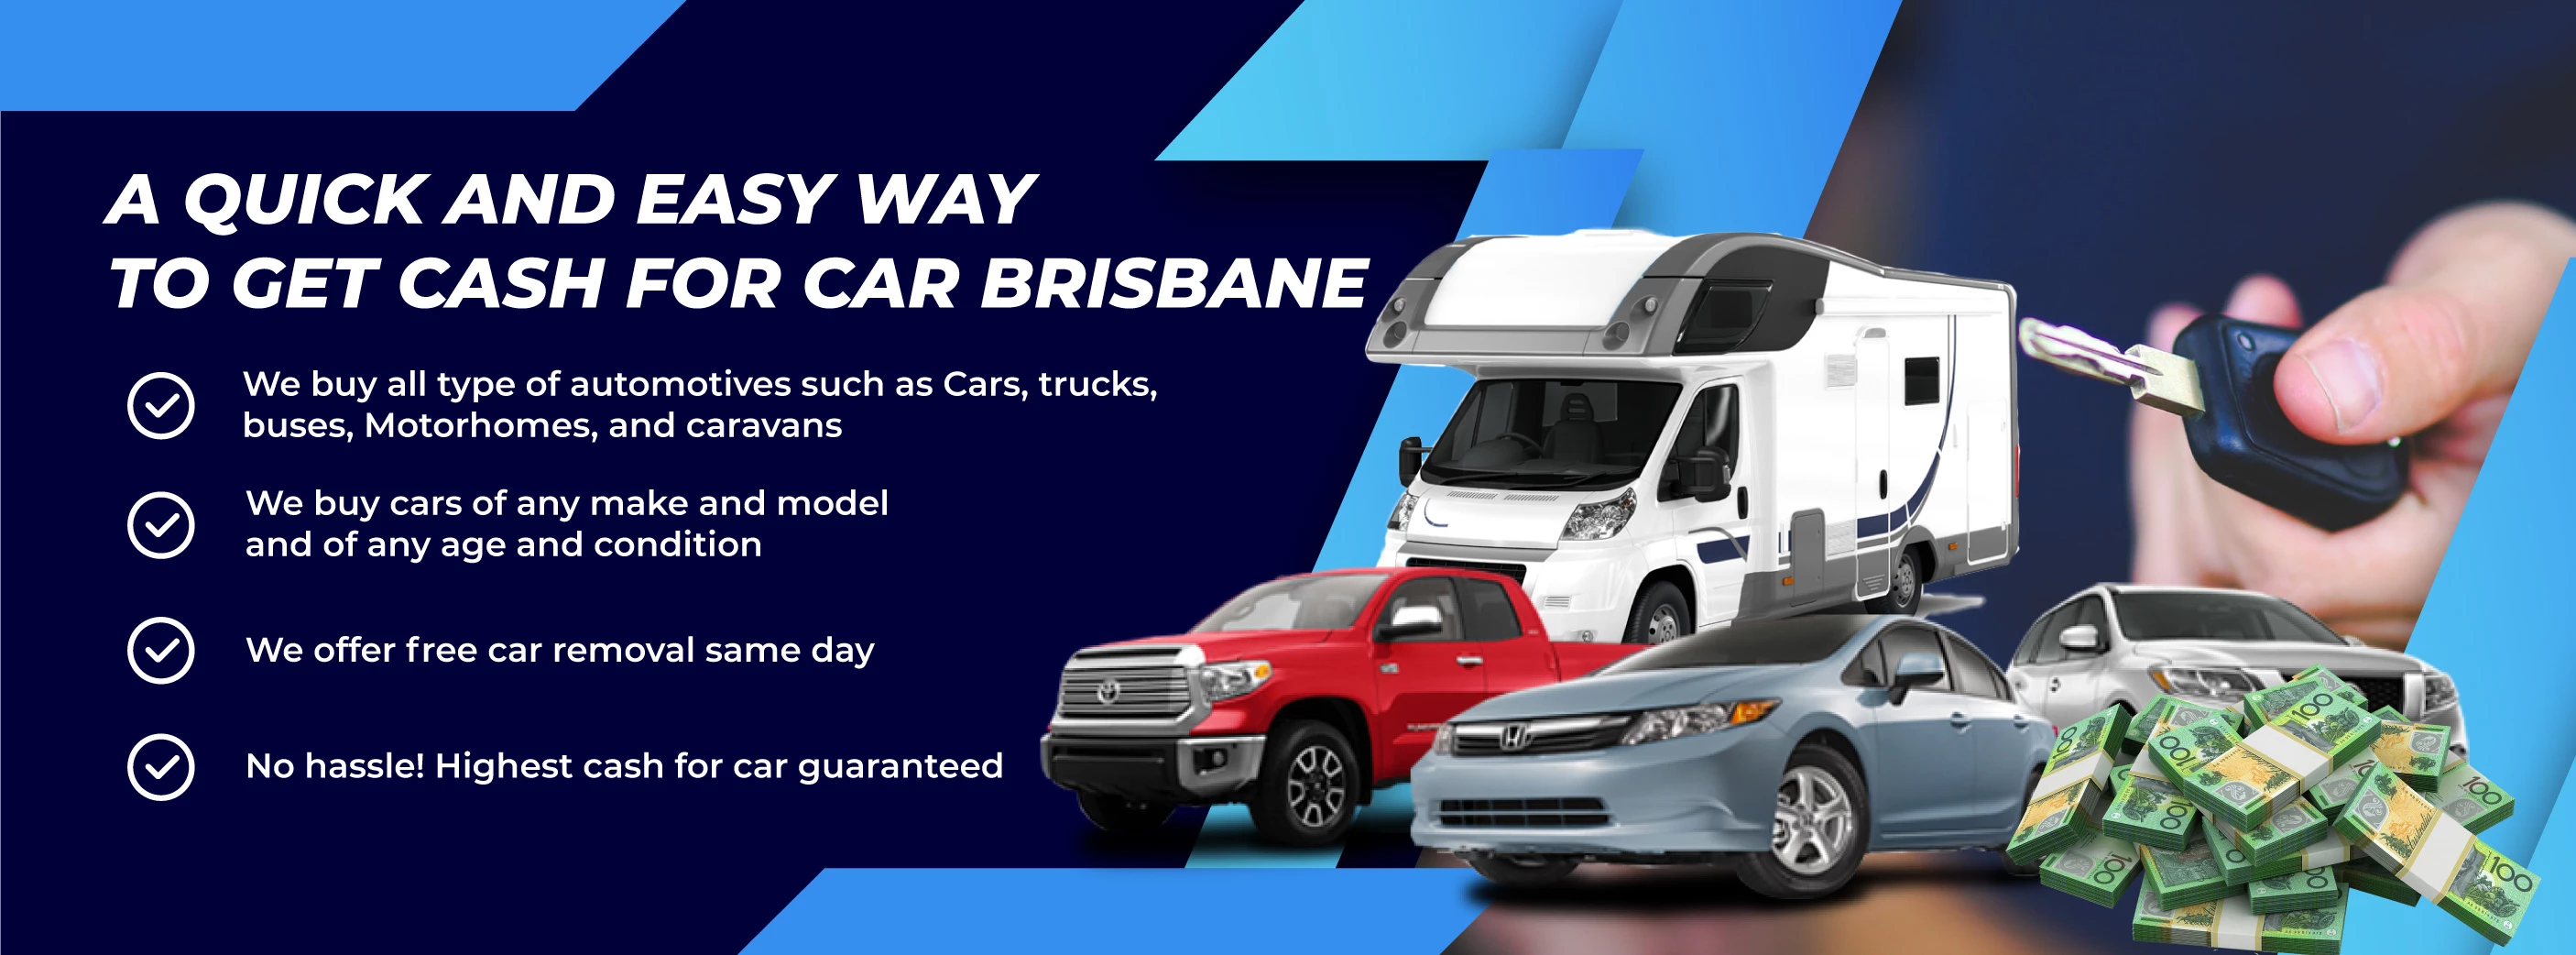 quick and easy way to get cash for cars brisbane